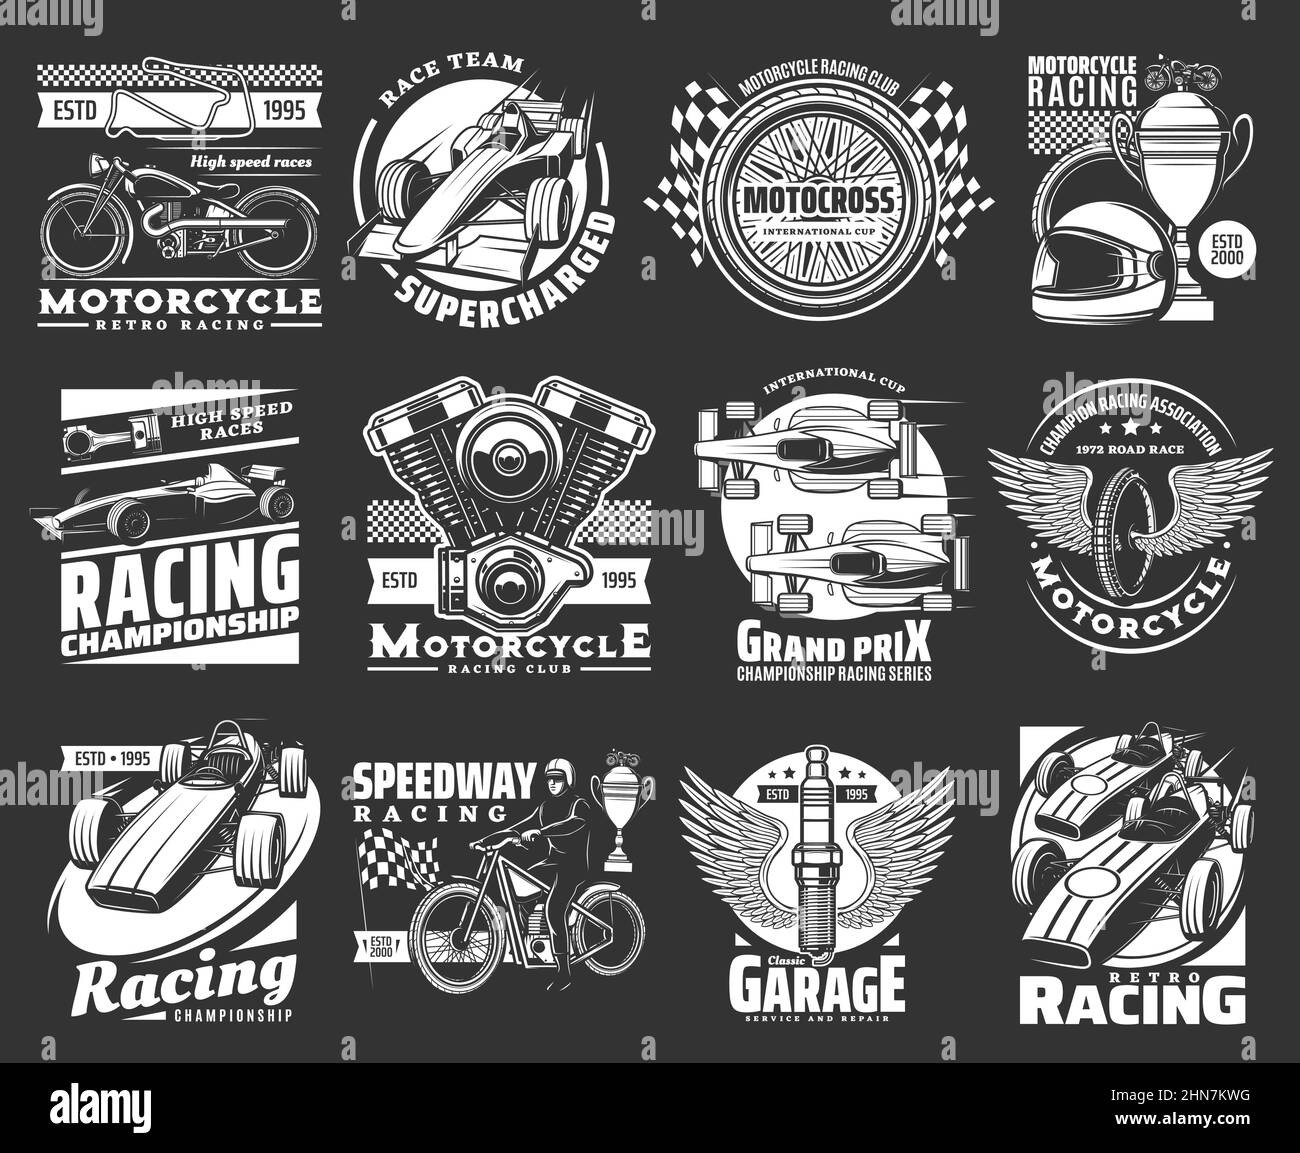 Download the auto motorbikes logo design vector 588166 royalty-free Vector  from Vecteezy for your projec… | Motorbike logo design, Motorbike logo, Bike  logos design